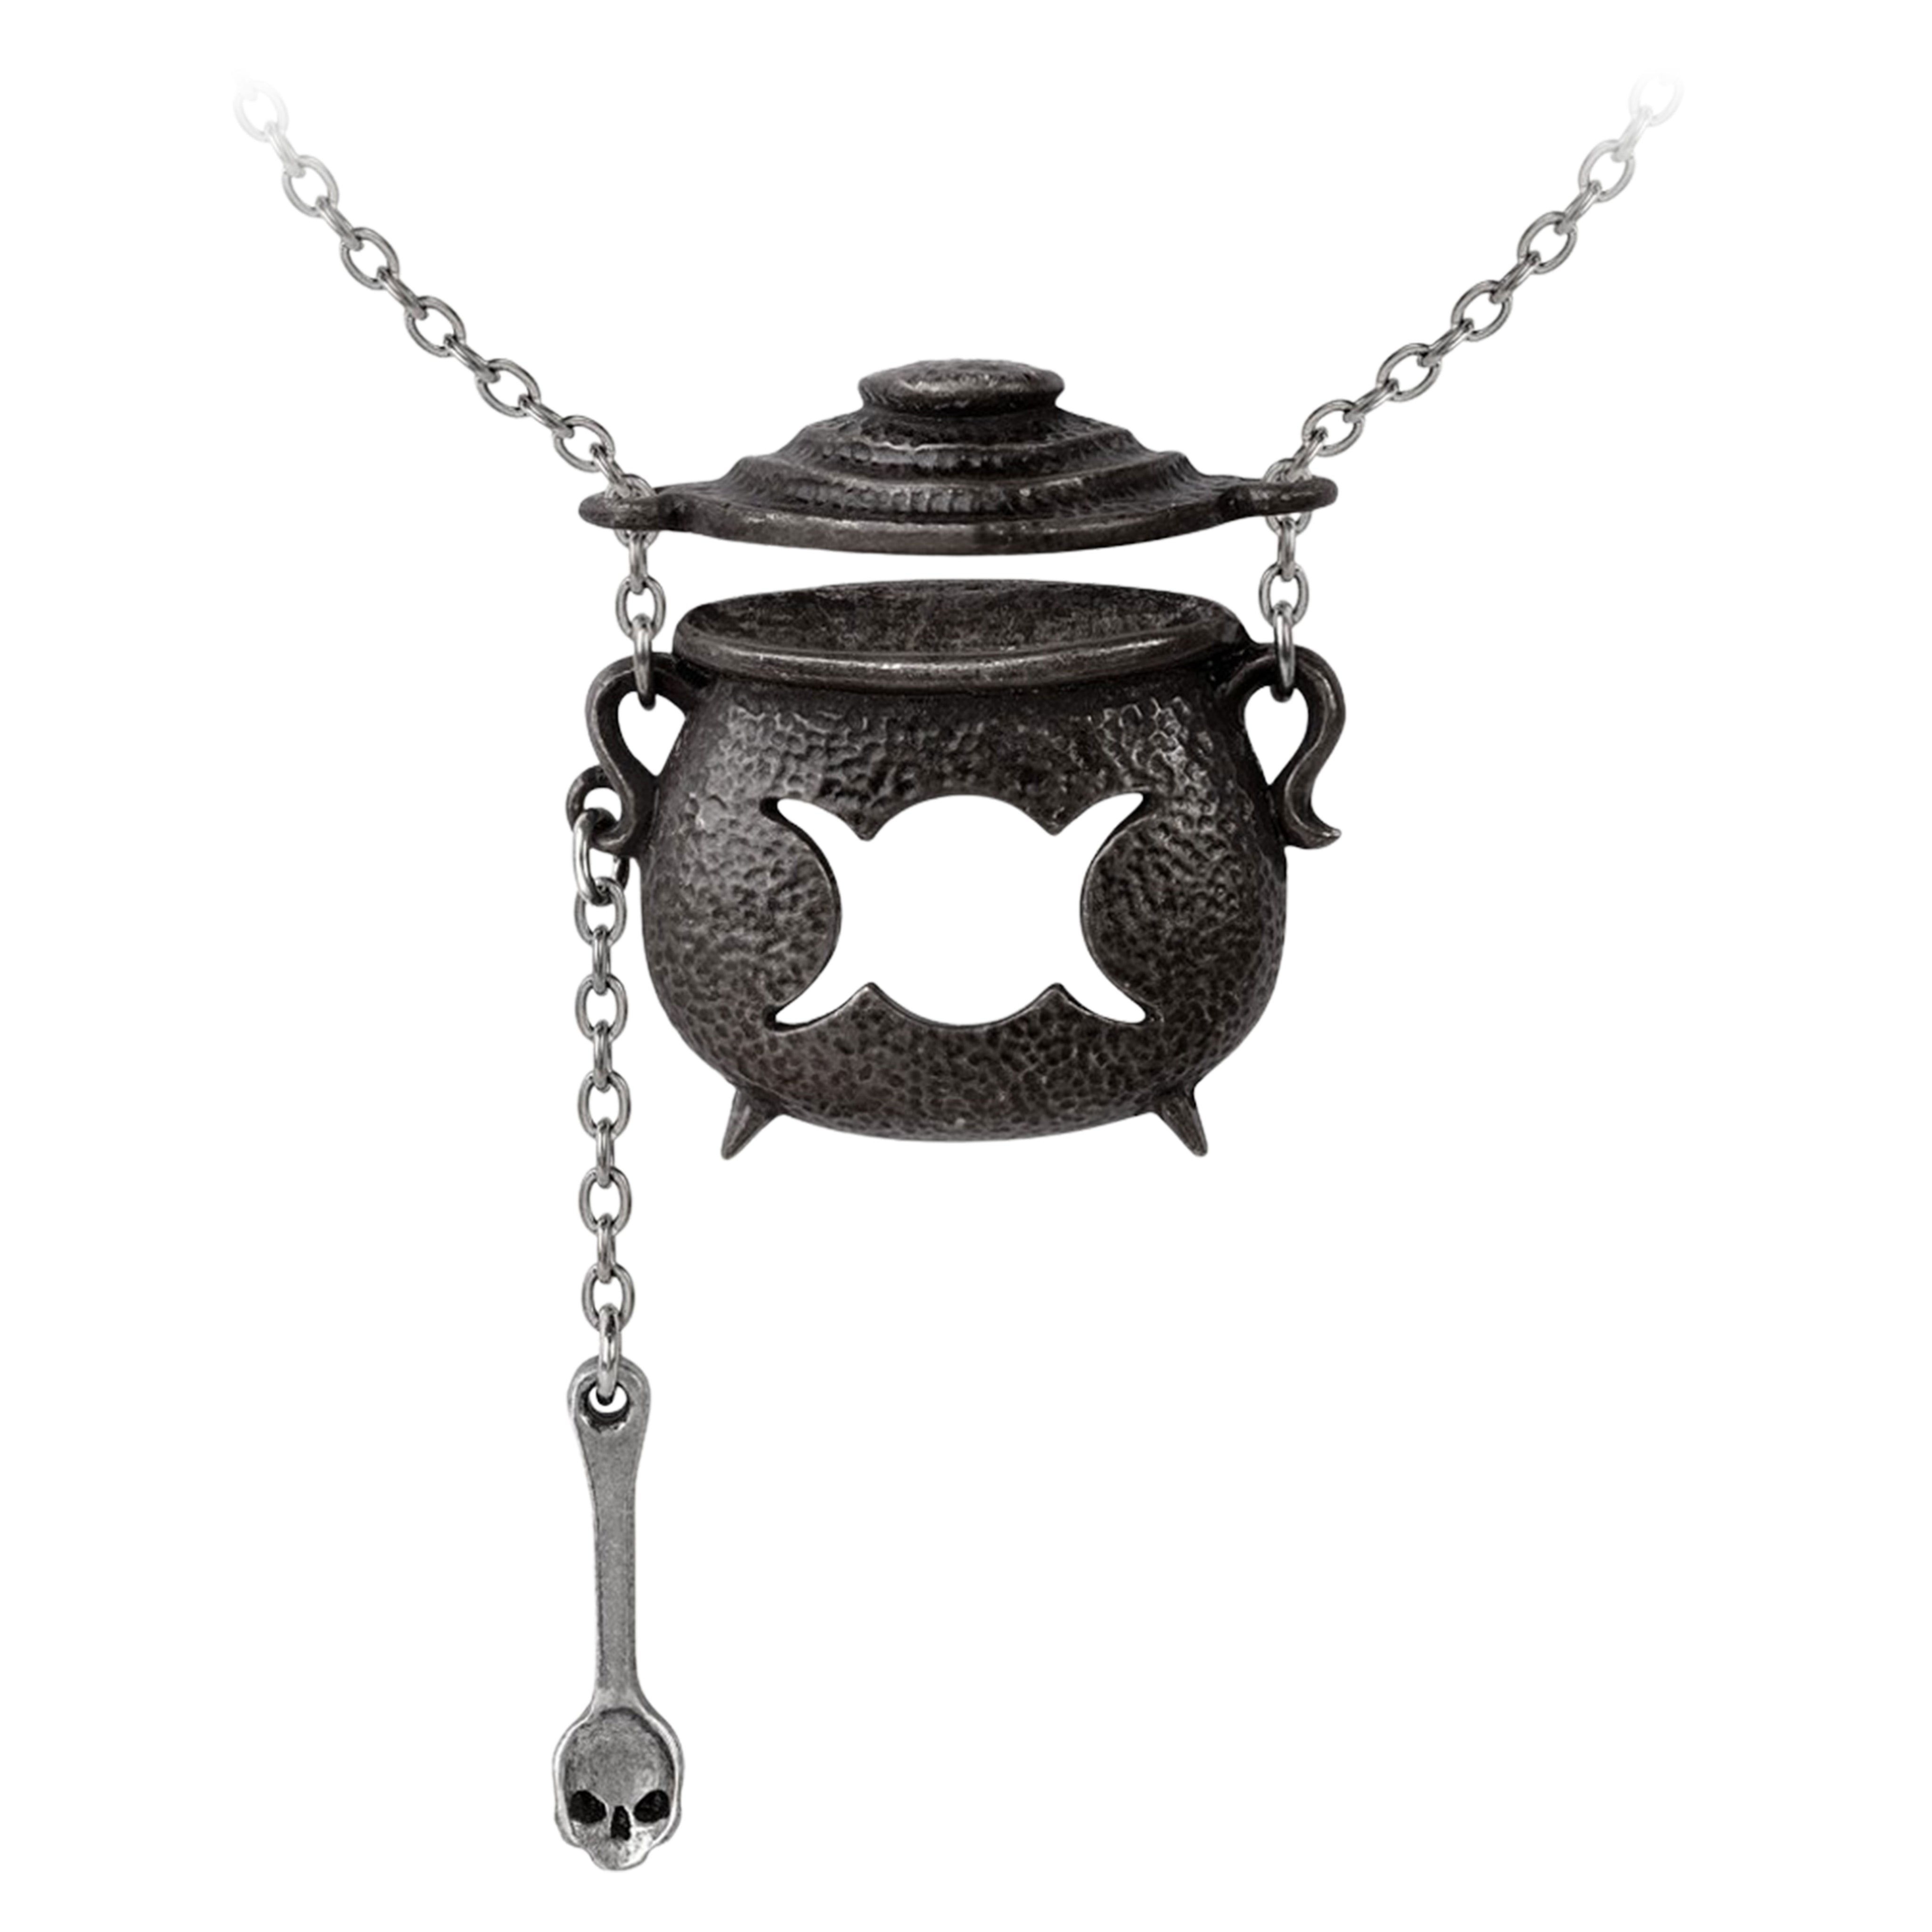 Witches Cauldron Necklace with Hanging Chain Spoon